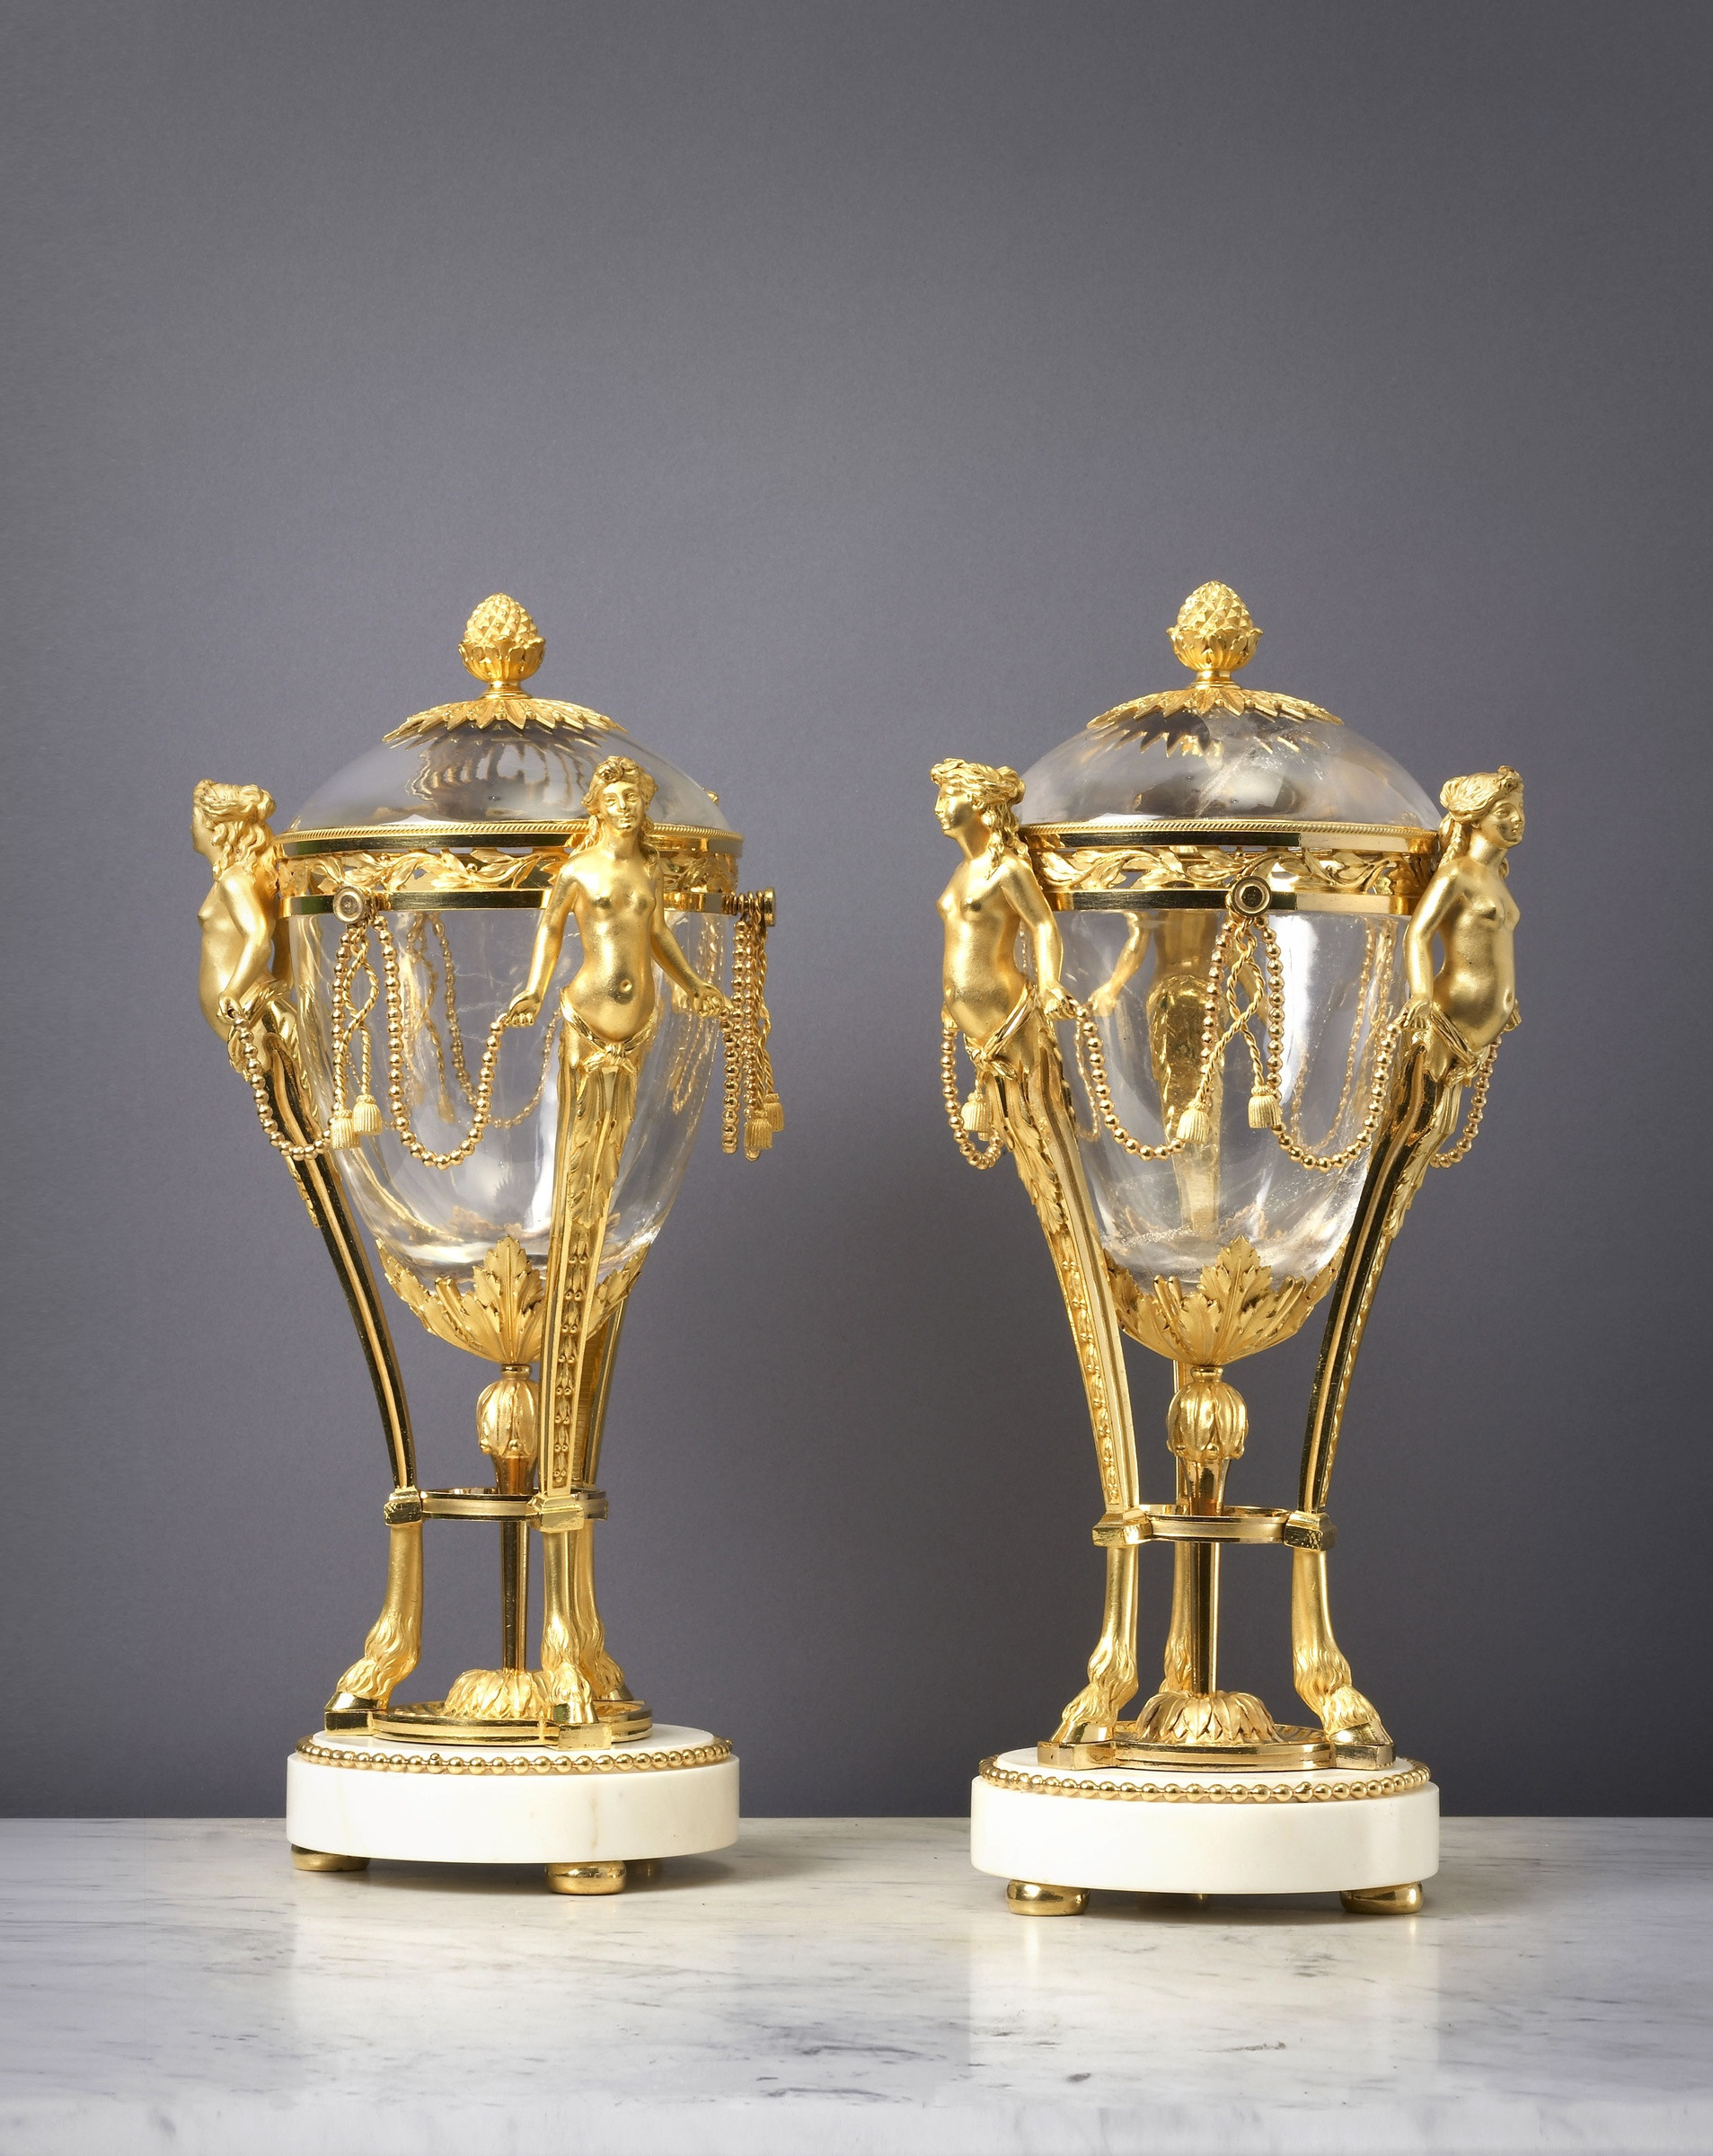 14 Perfect St Louis Crystal France Vase 2024 free download st louis crystal france vase of antoine philippe pajot attributed to a pair of louis xvi with a pair of louis xvi cassolettes attributed to antoine philippe pajot